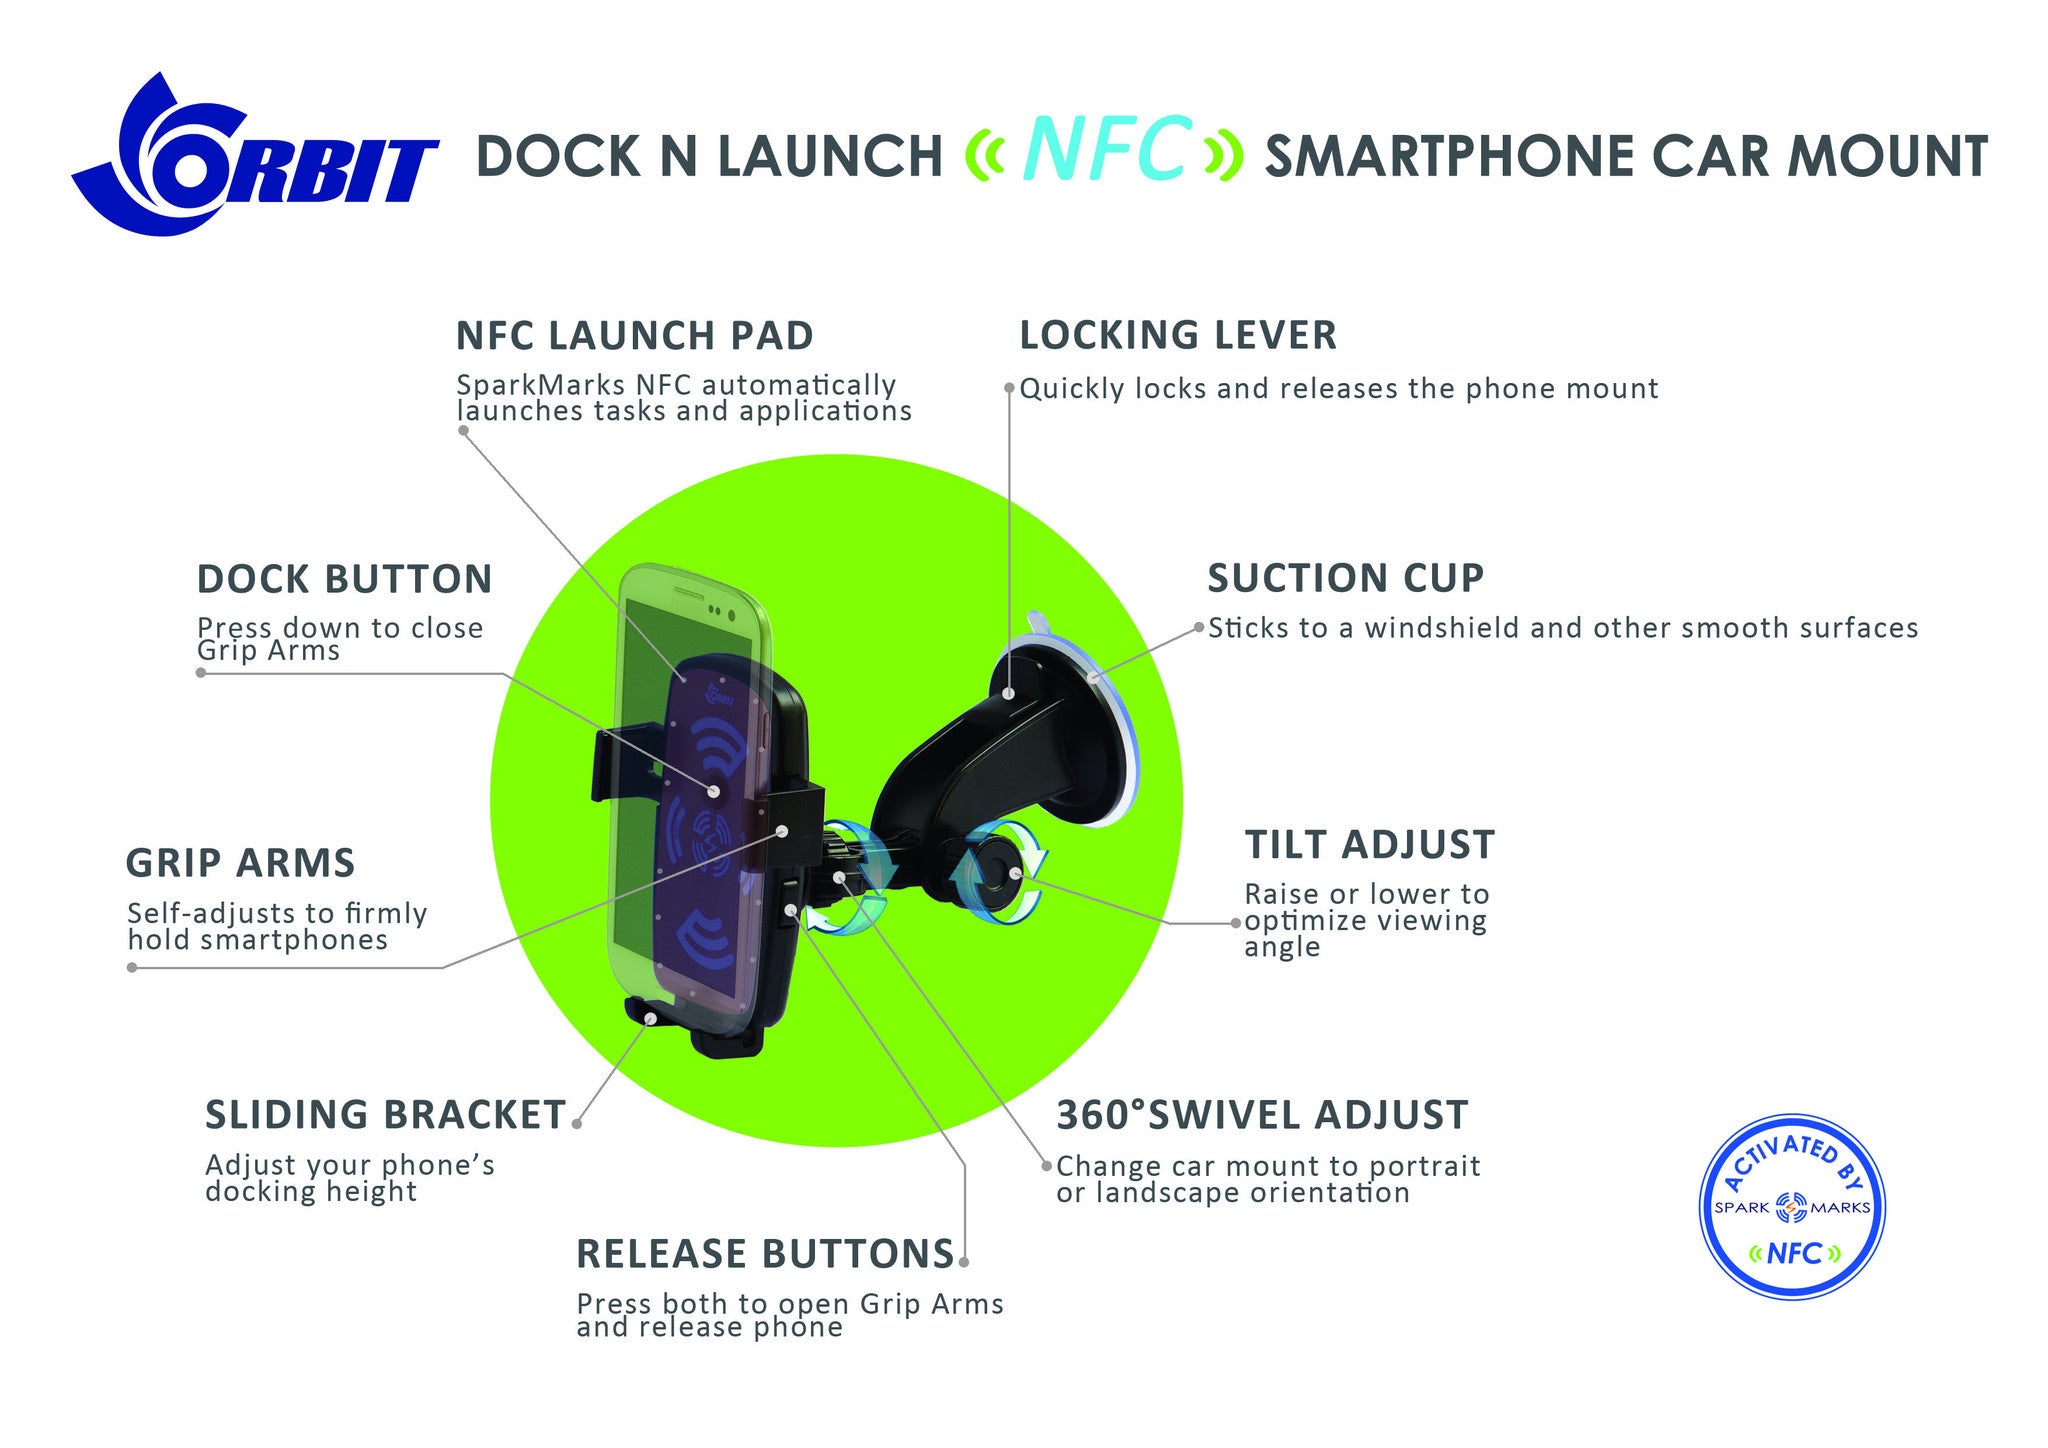 "Dock N Launch" NFC Car Mount with SparkMarks NFC